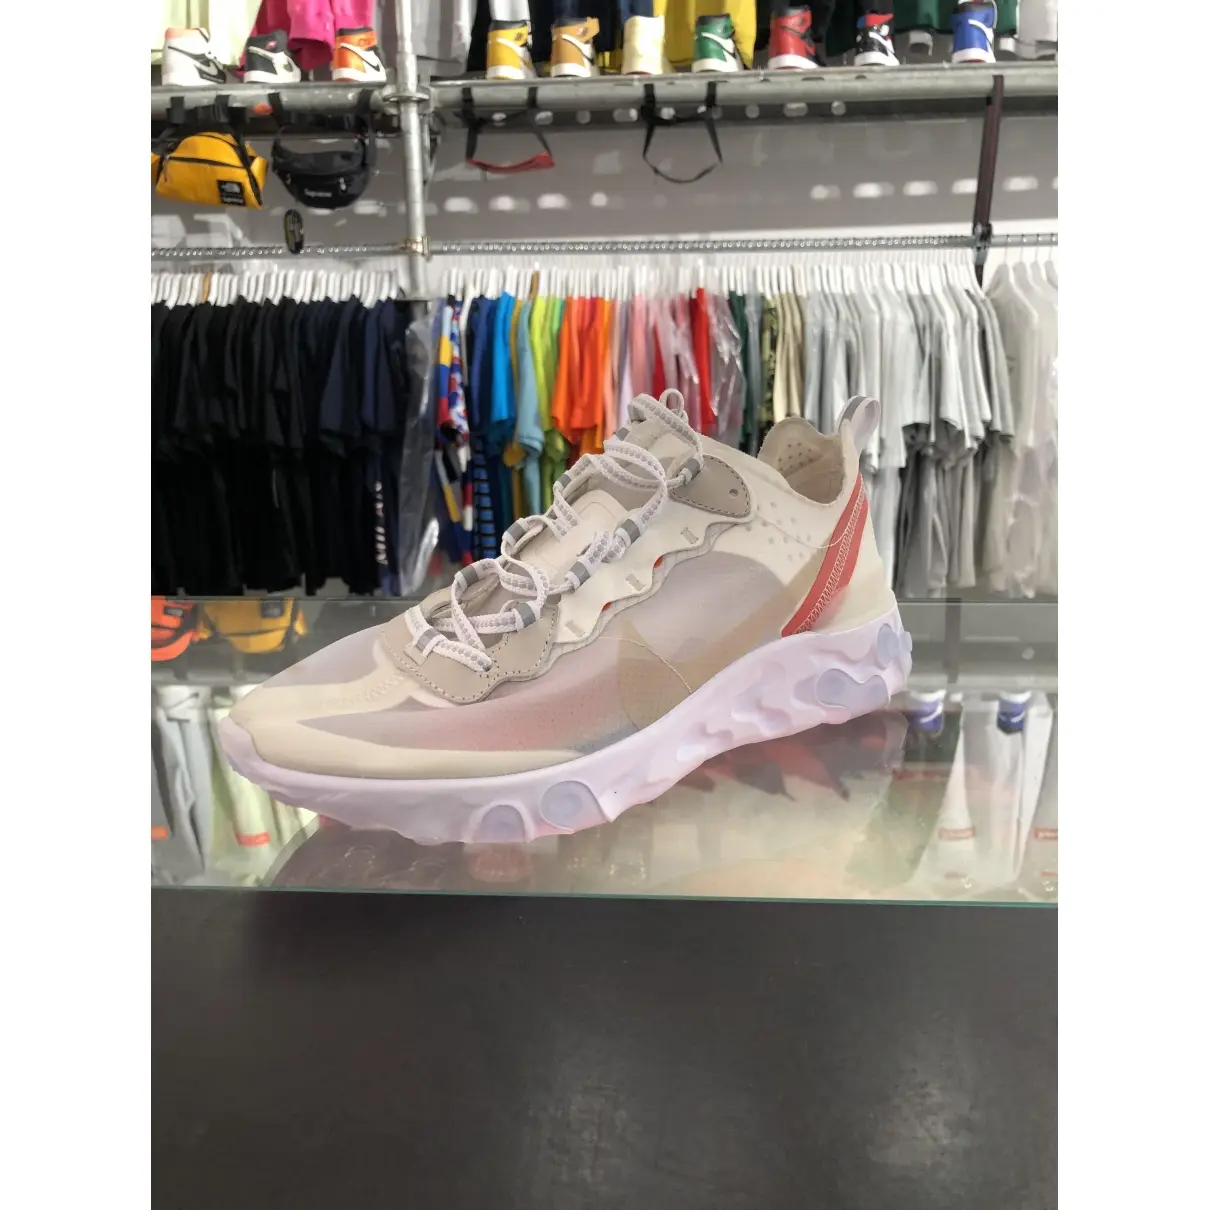 Nike React Element 87 cloth low trainers for sale